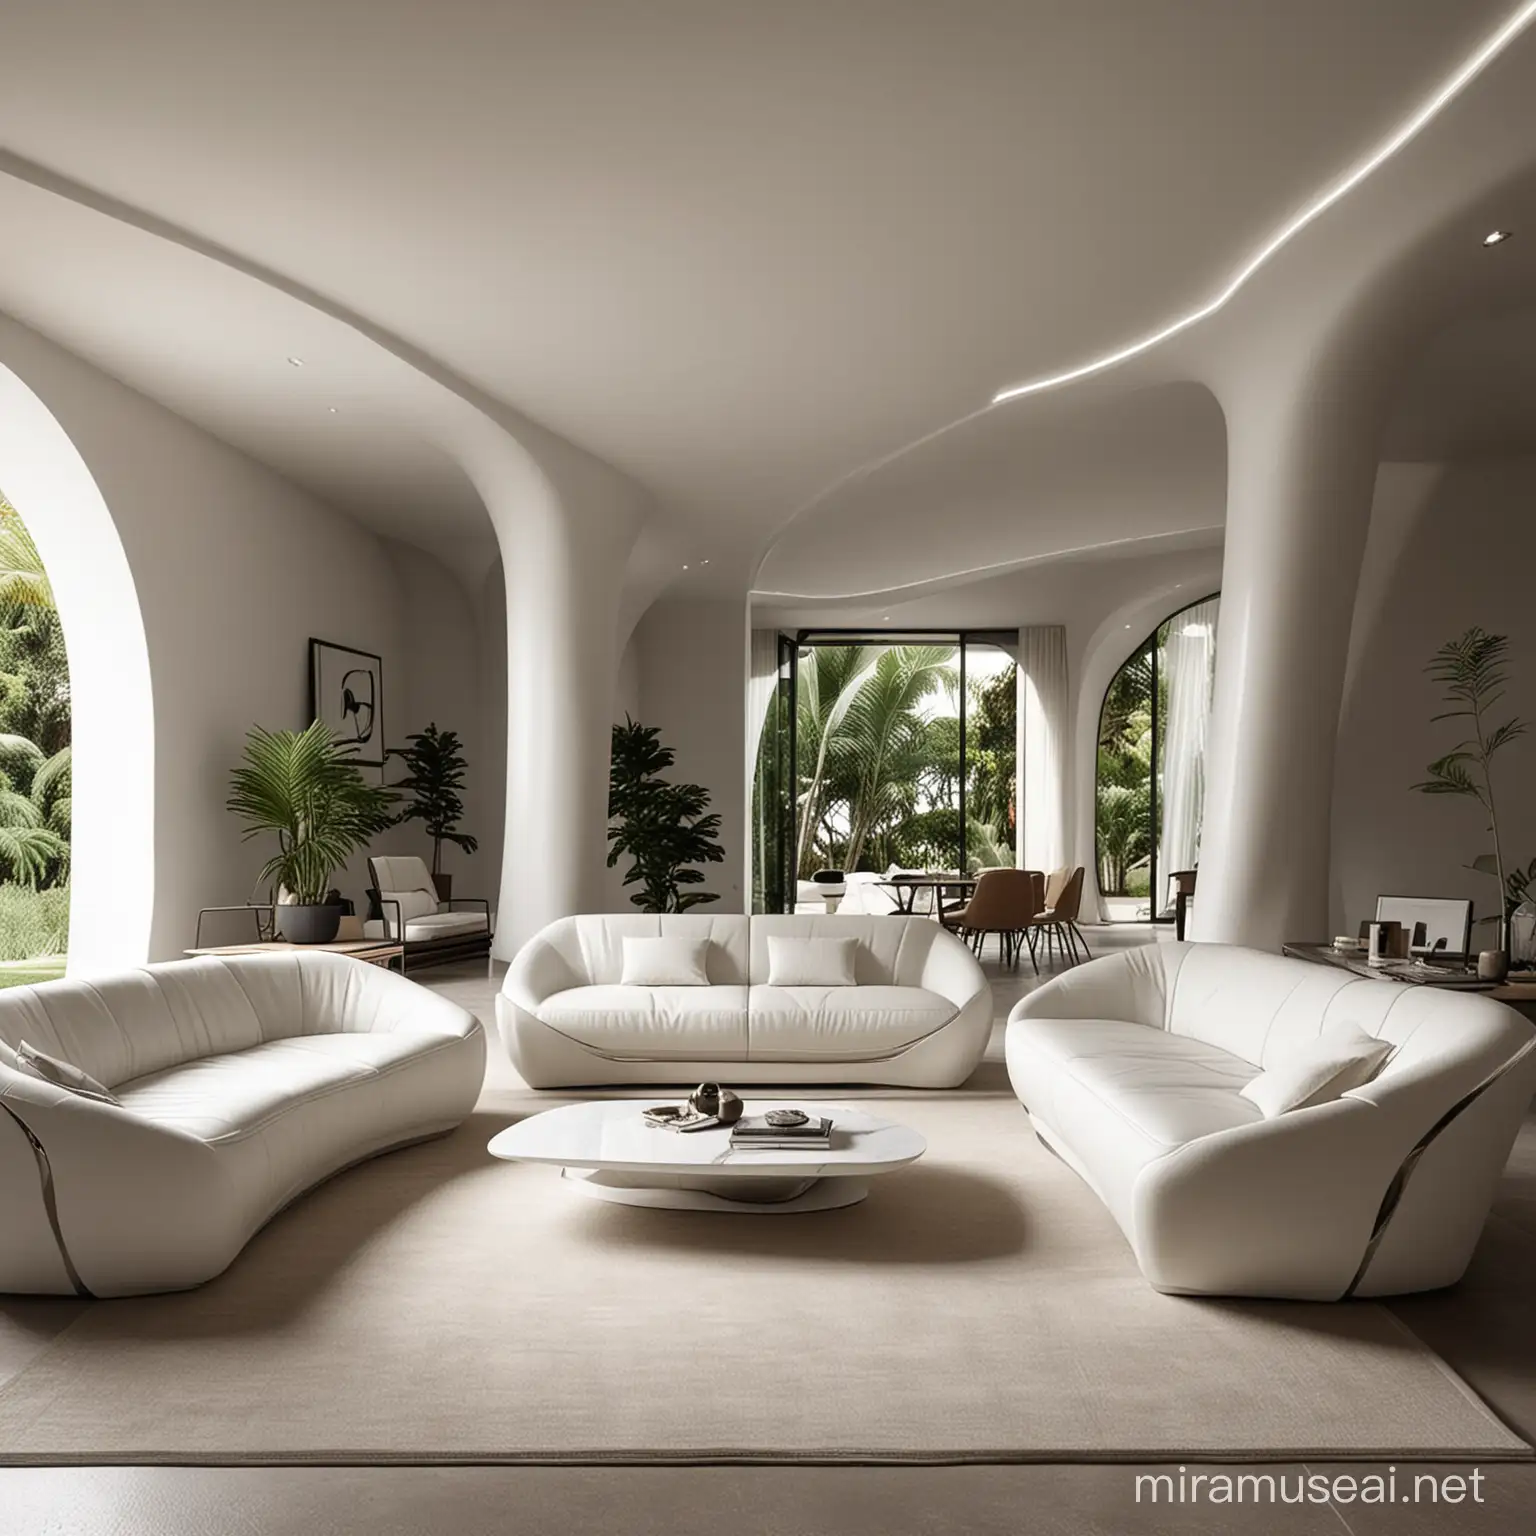 a tropical Sicily living room influenced by the works of Zaha Hadid#Newcollection#newstyl#tredy#livingroom#interiordesign#aiprompts#archdaily#aiinteriordesign#decoration#interiordesignerslife#interiordesignersofinstagram#interiordesignblogger#interiordesignlover#digitalart#furniture#homedecor#productdesign#interiordesigninspiration#setdesign#visual#visualart#interiordesignaddict#midjourney